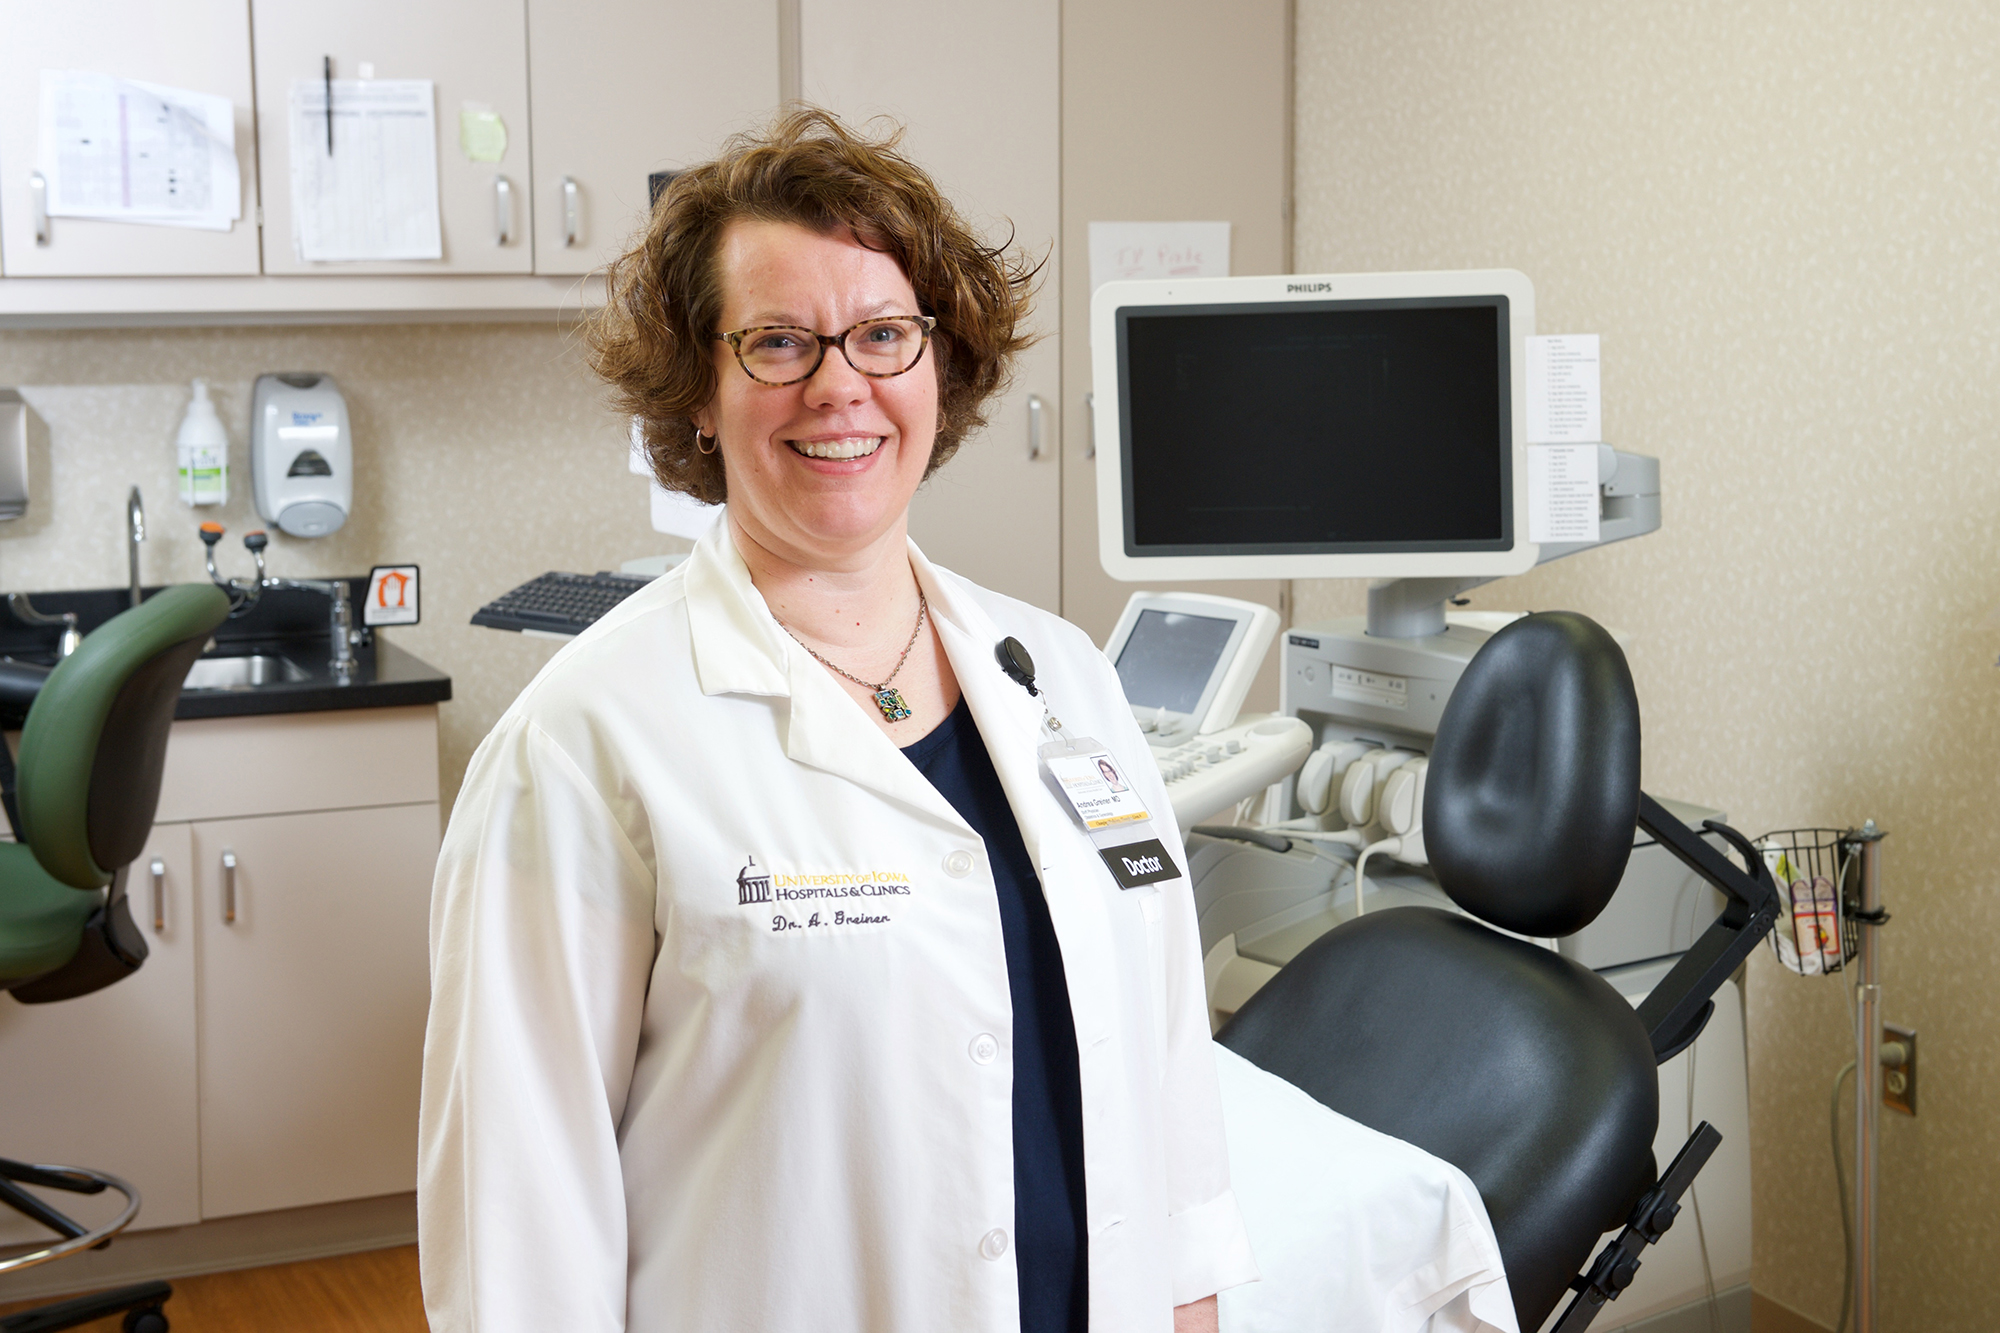 Maternal-fetal medicine (MFM) specialist Andrea Greiner in a clinical setting